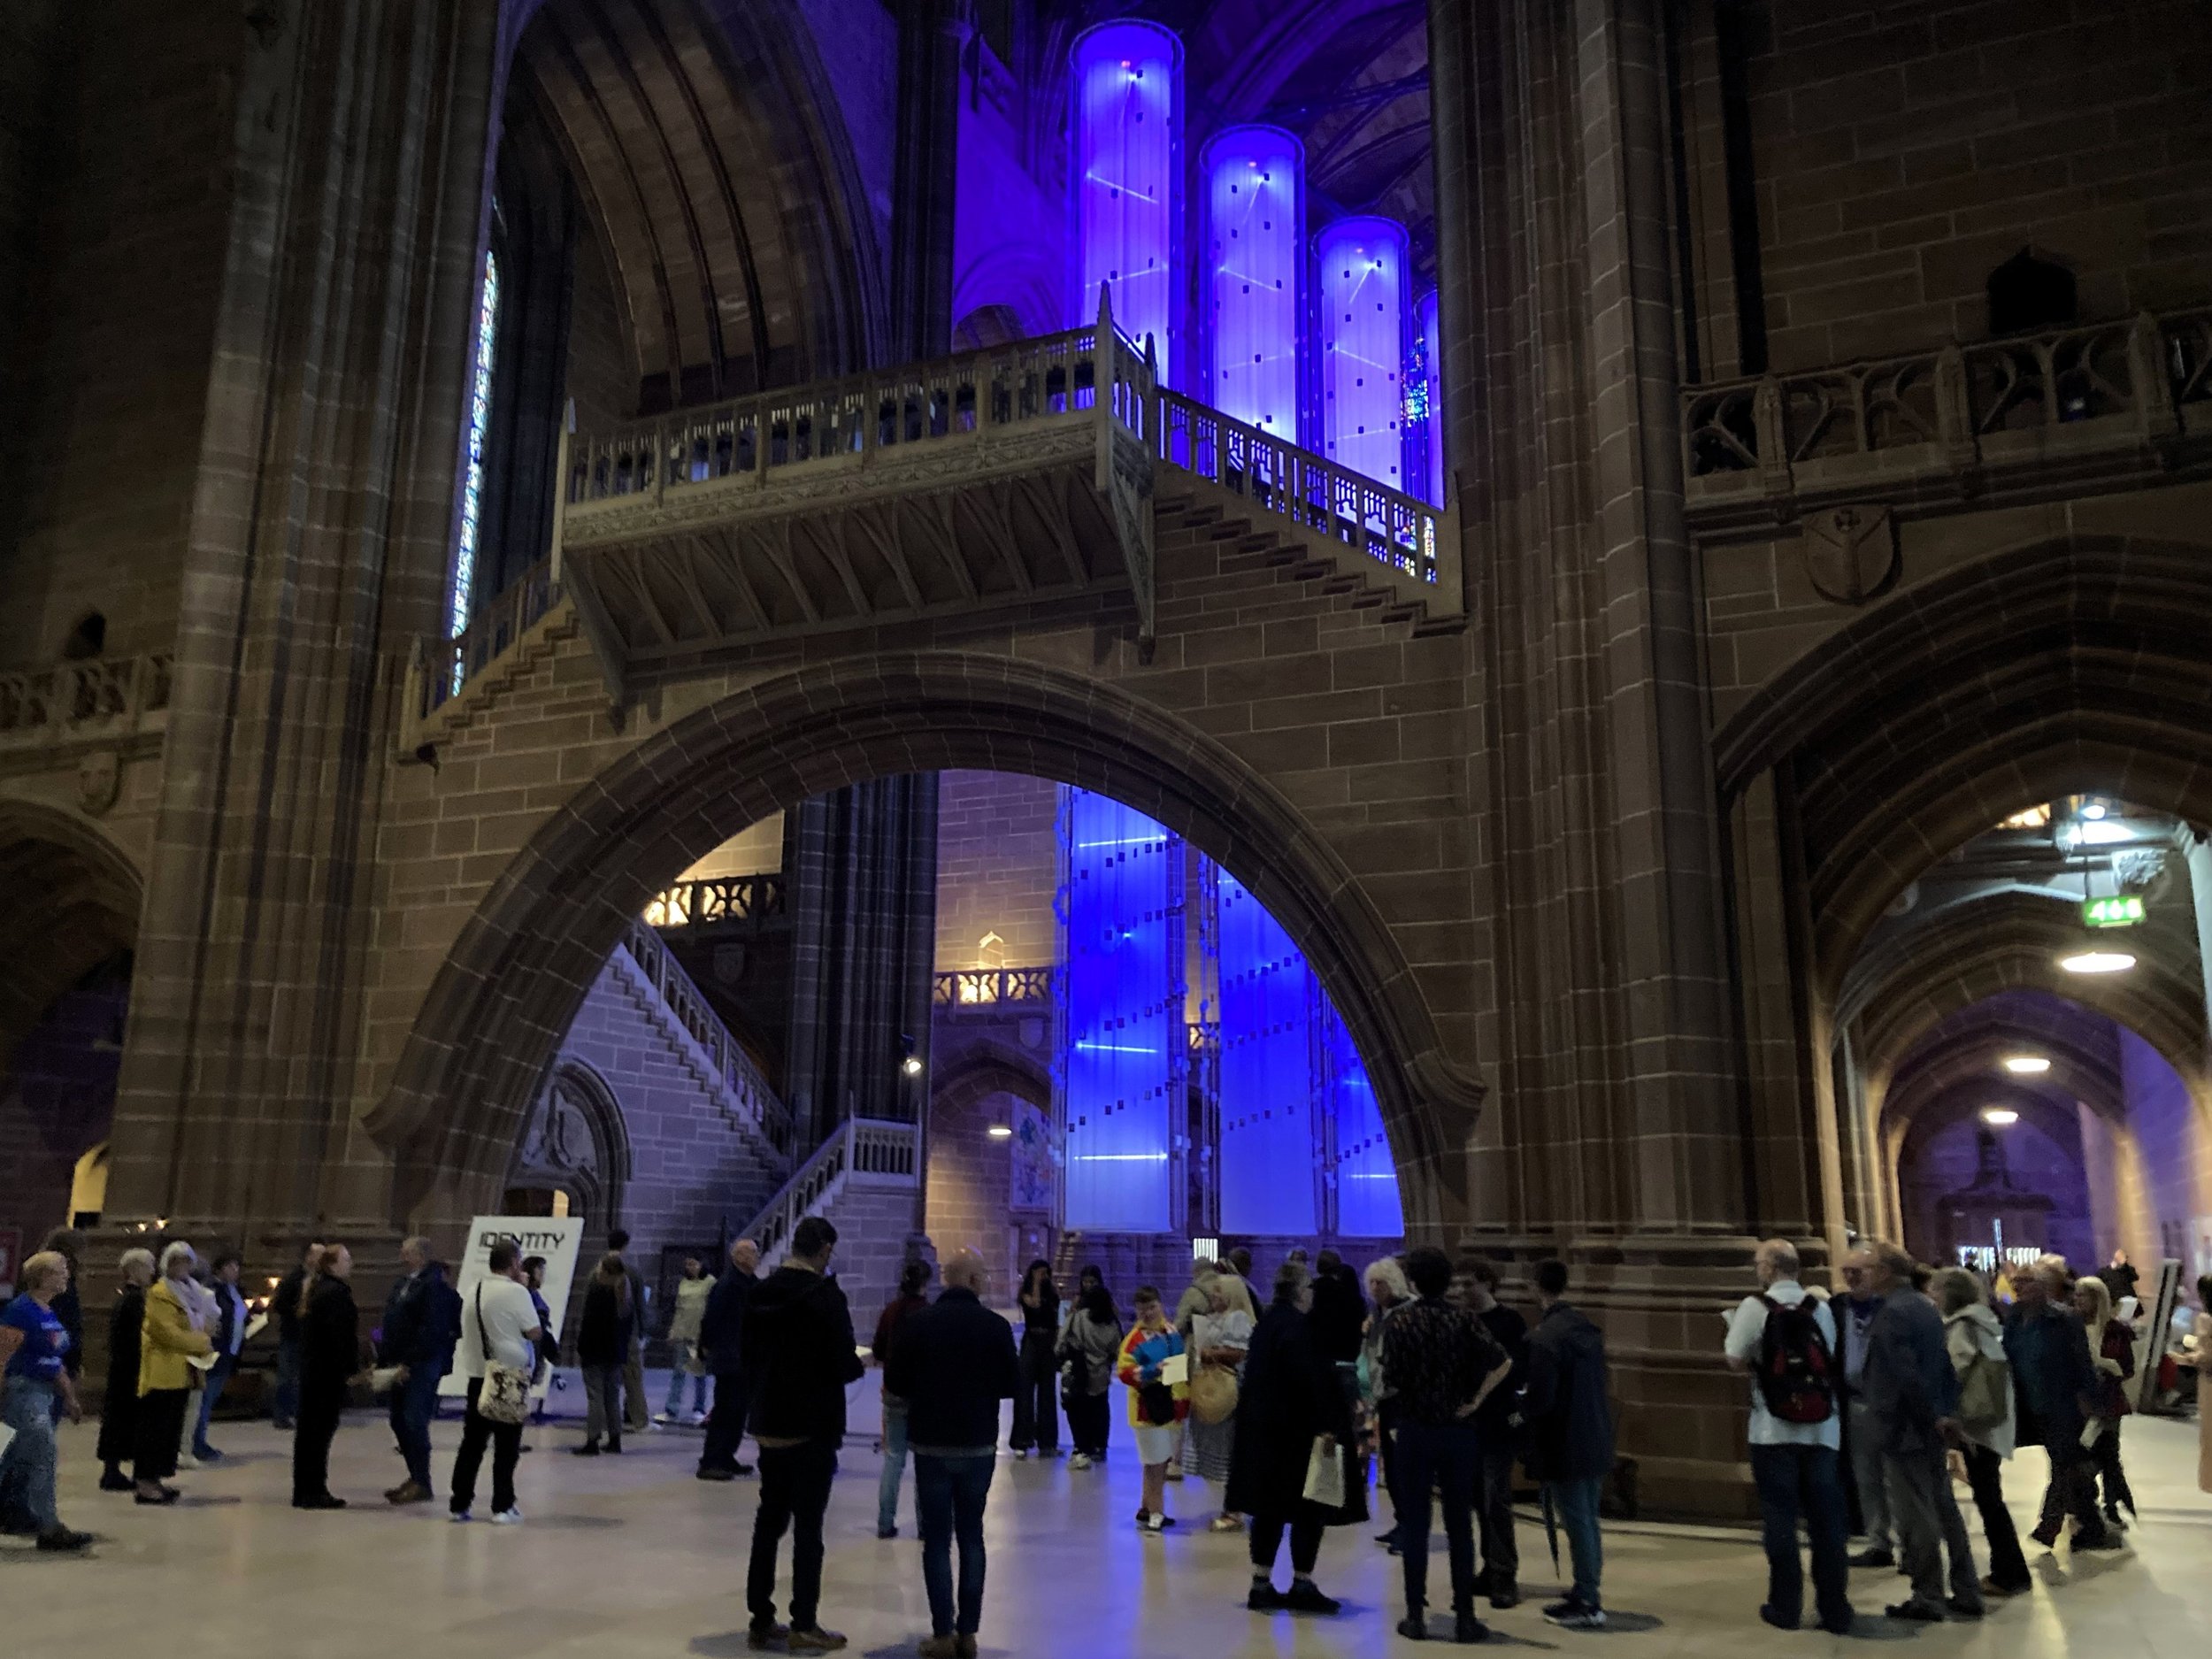  IDENTITY by Peter Walker - Installation in Liverpool Cathedral. PHOTO: Canon Nick Basson. 